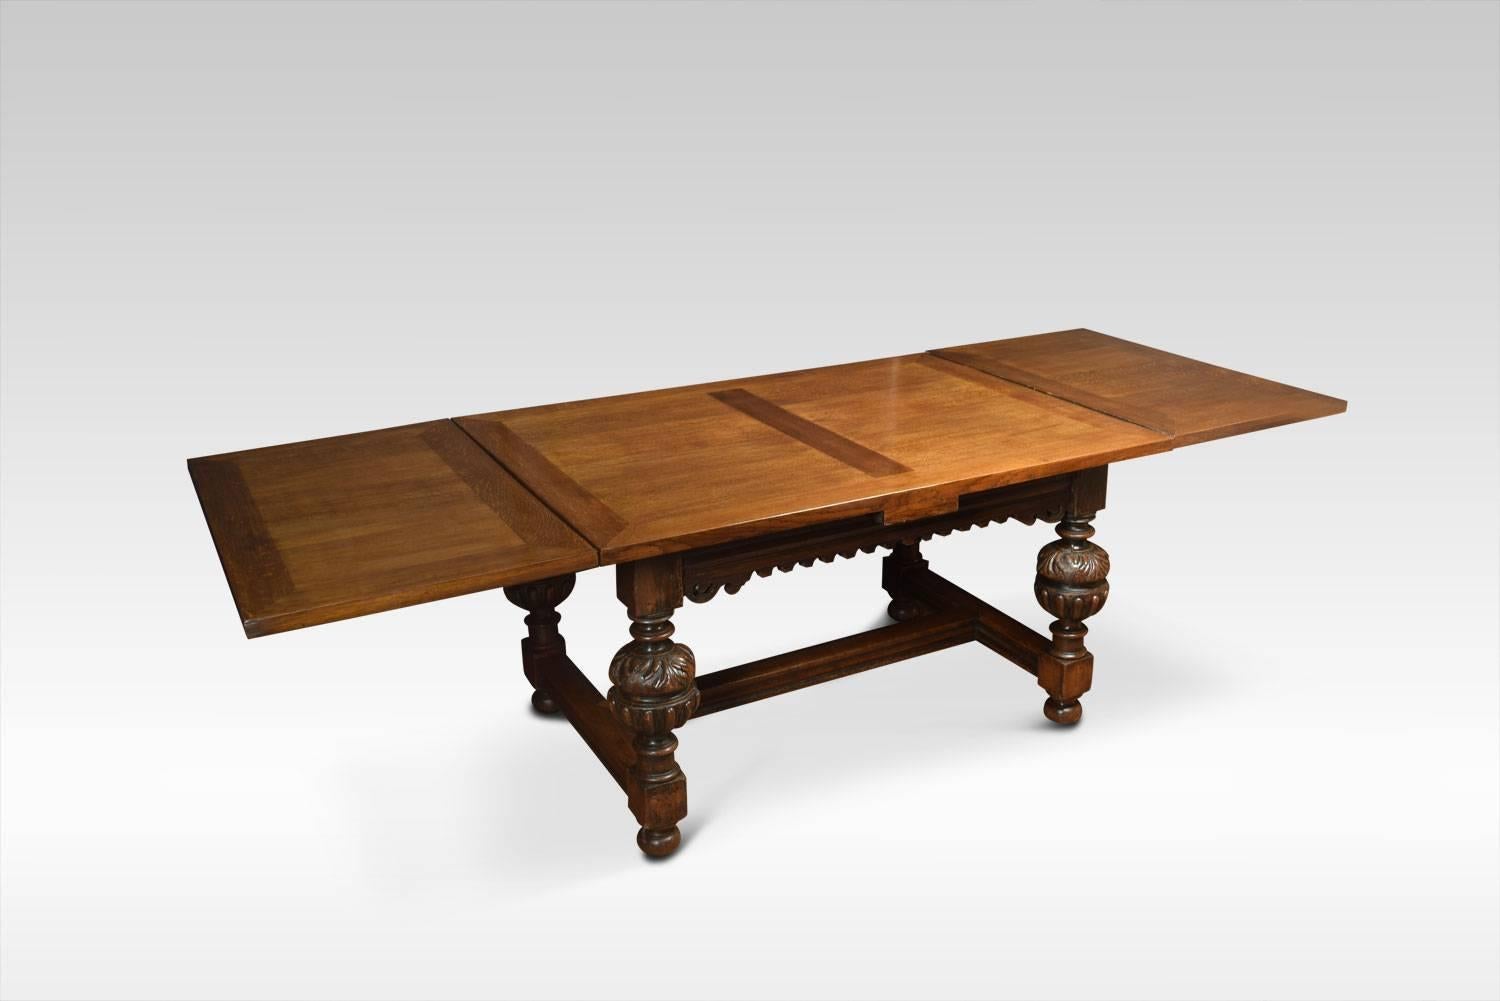 An Impressive Elizabethan style oak draw-leaf table of generous proportions. The thick plank top having pull-out leaves to each end above strap-work frieze with scrolling foliated carving raised on bulbous cup and cover legs leading down to block